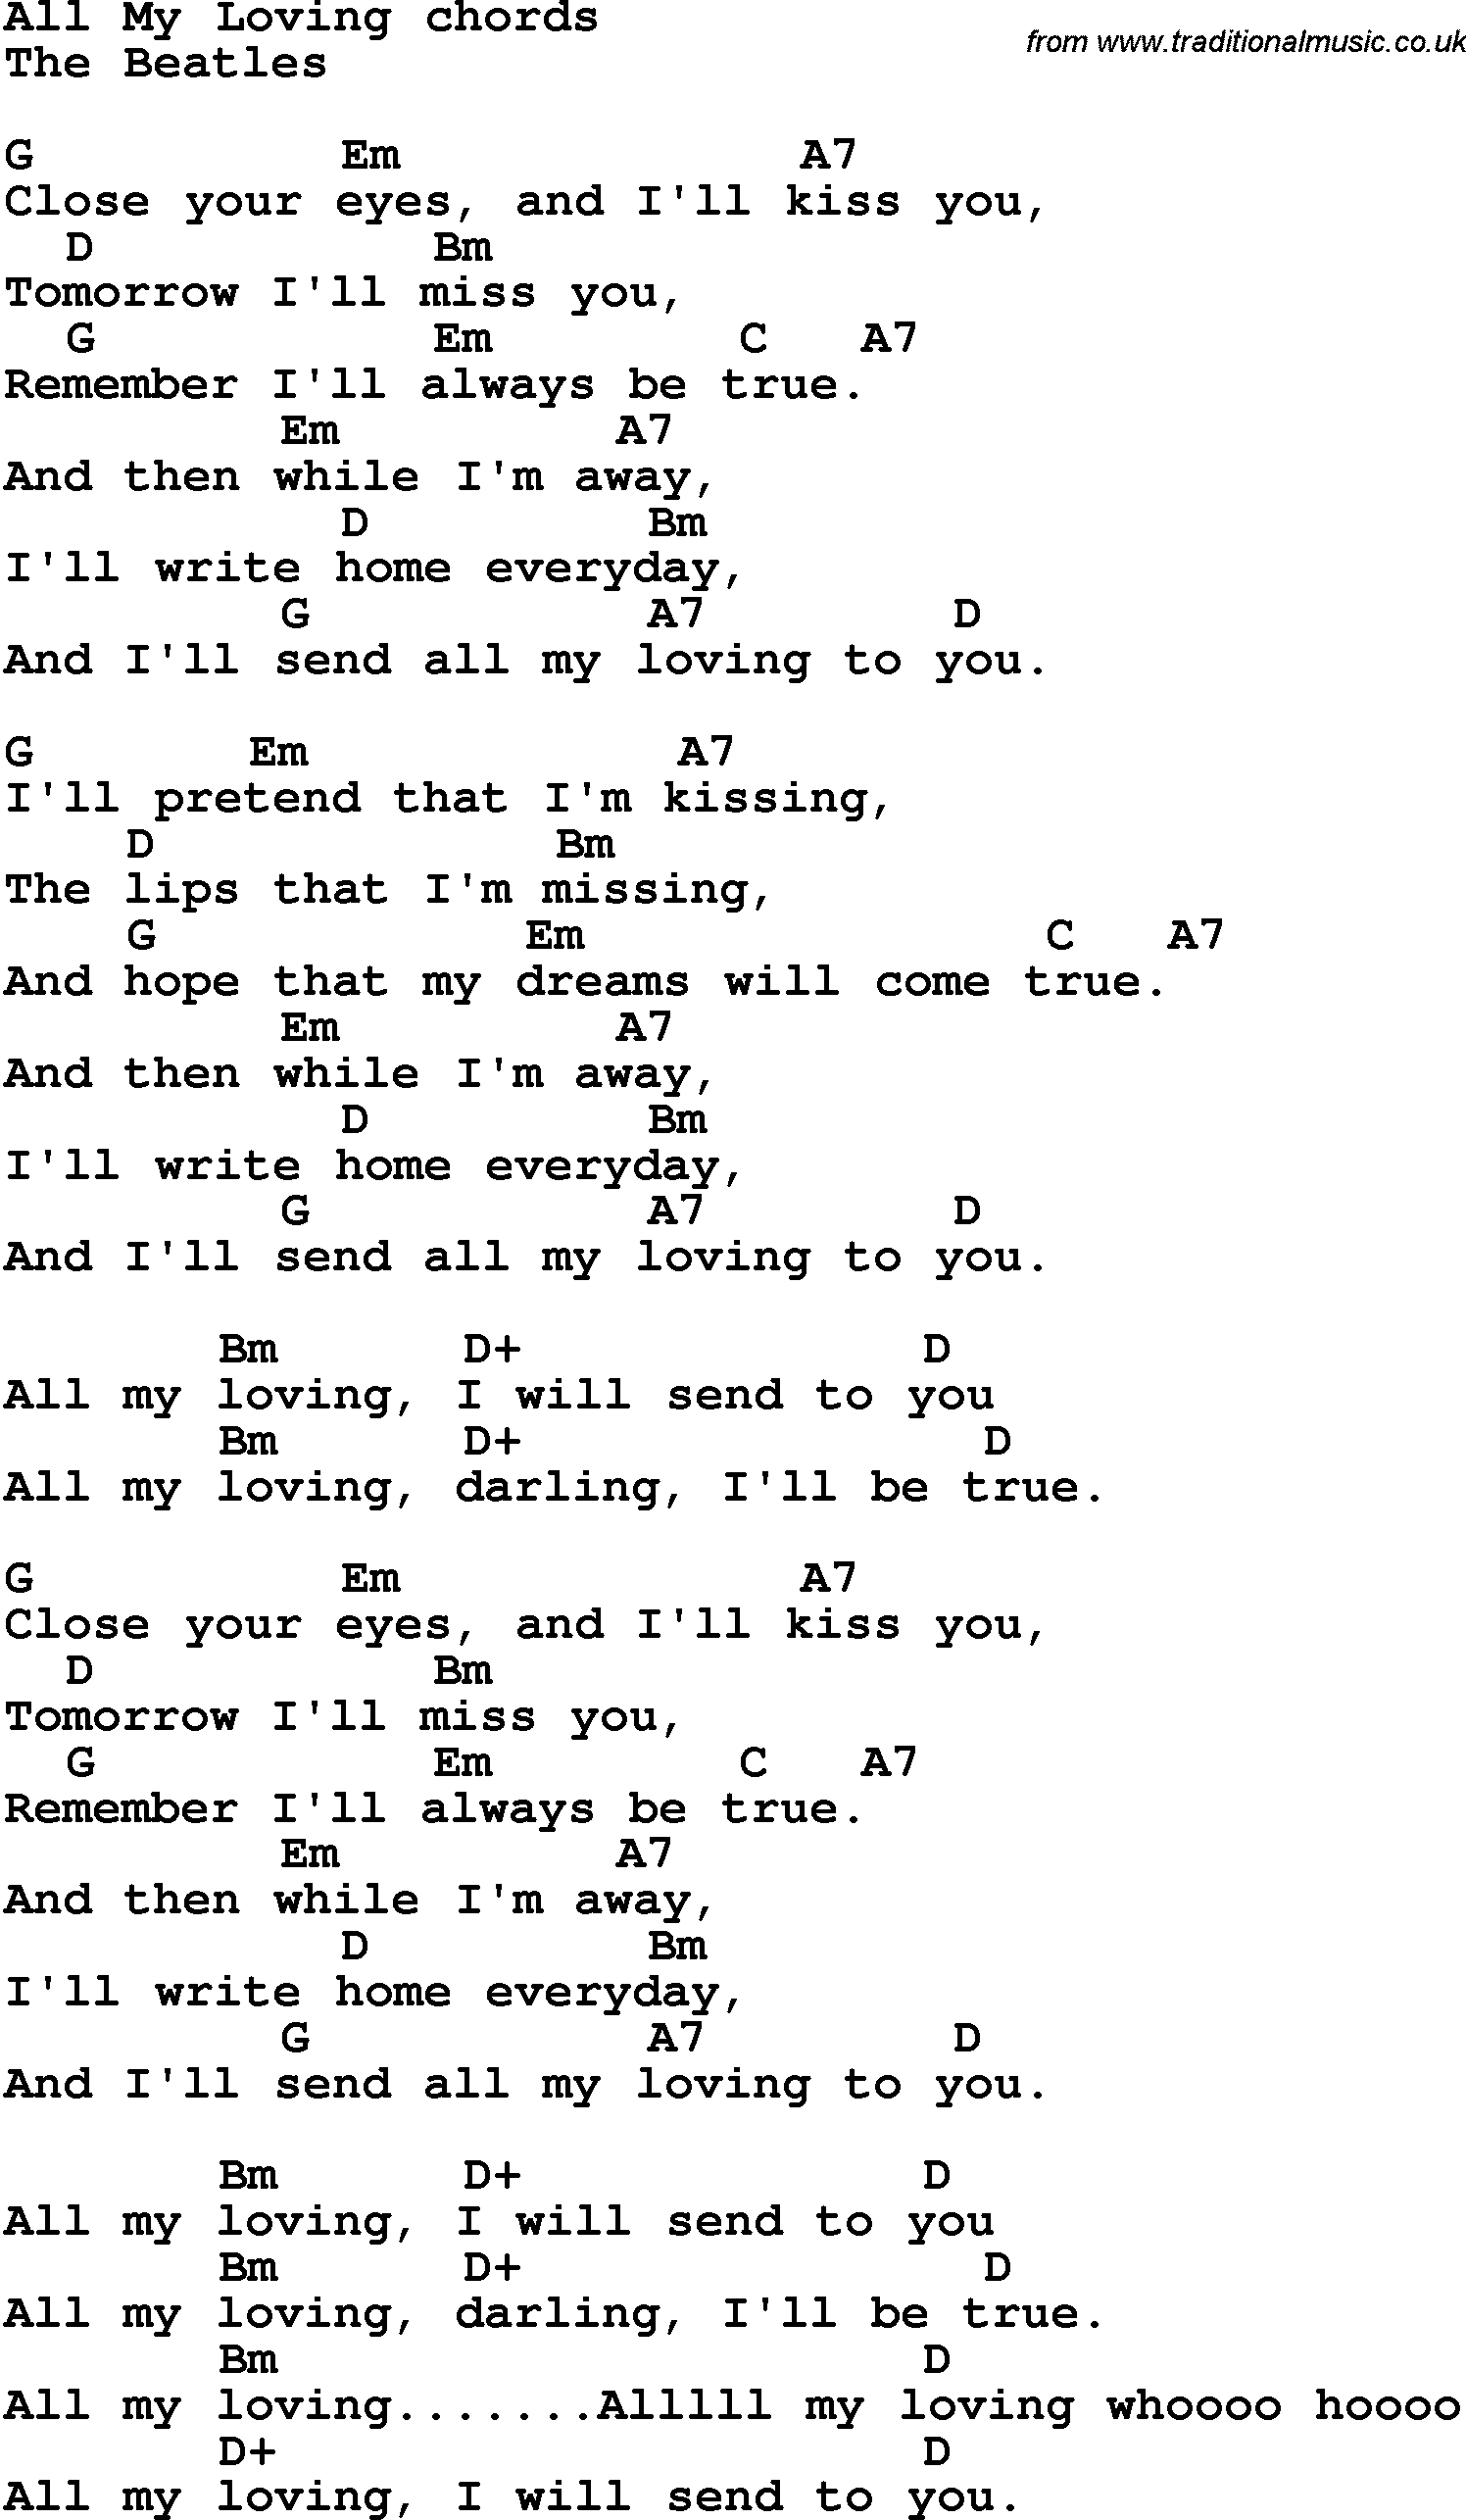 Song Lyrics with guitar chords for All My Loving